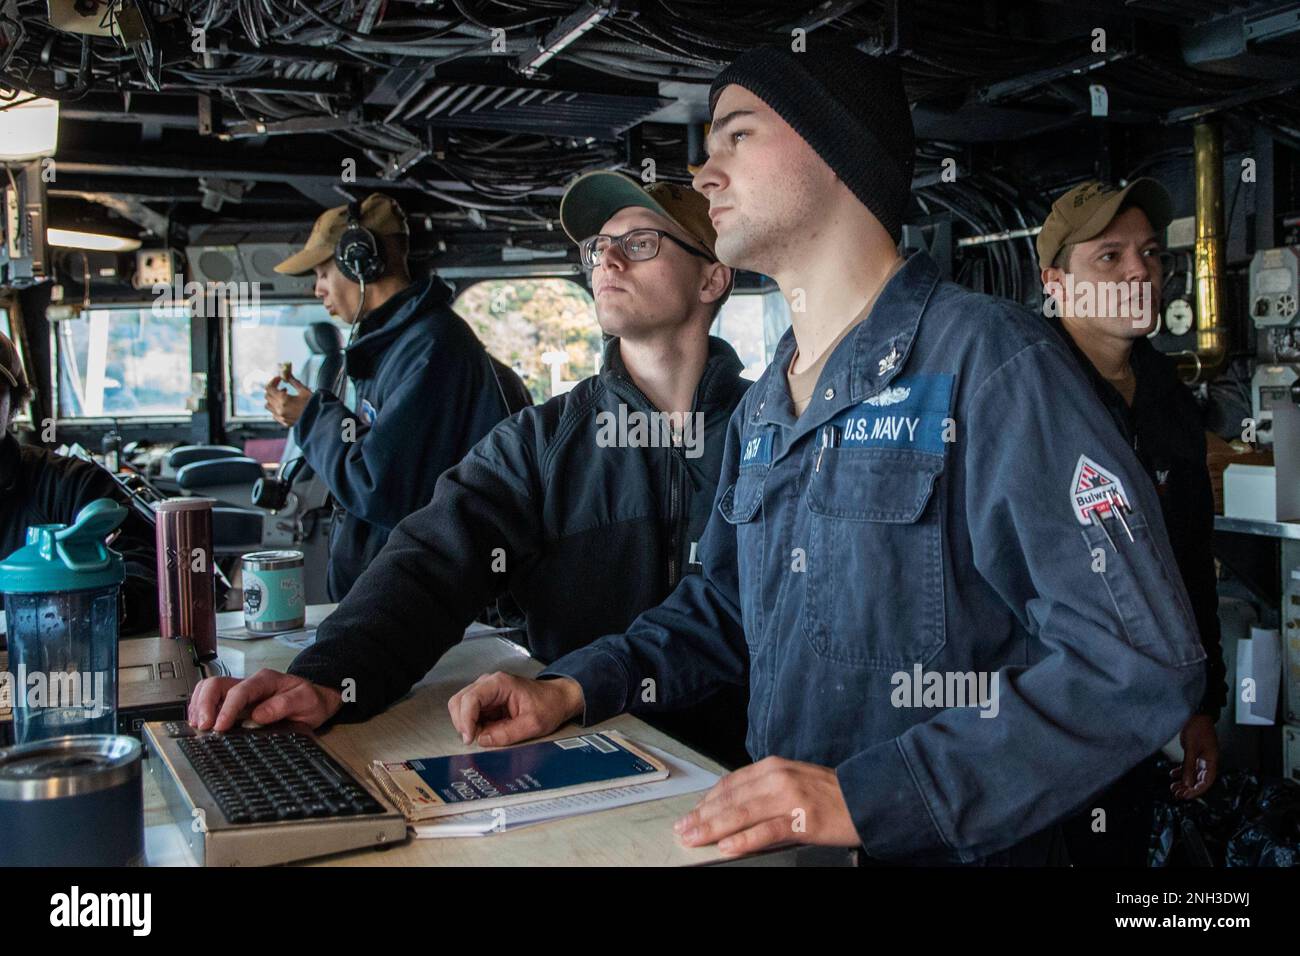 YOKOSUKA, Japan (Dec. 9, 2022) – Lt. j.g. Arthur Busick (Left), from Daniel Island, N.C., and Electronics Technician 2nd Class Zachary Smith, from Meridian, Idaho, look at a navigation system during a restricted maneuvering evolution aboard U.S. 7th Fleet flagship USS Blue Ridge (LCC 19), Dec. 9, 2022. Blue Ridge is the oldest operational ship in the Navy and, as 7th Fleet command ship, actively works to foster relationships with allies and partners in the Indo-Pacific region. Stock Photo